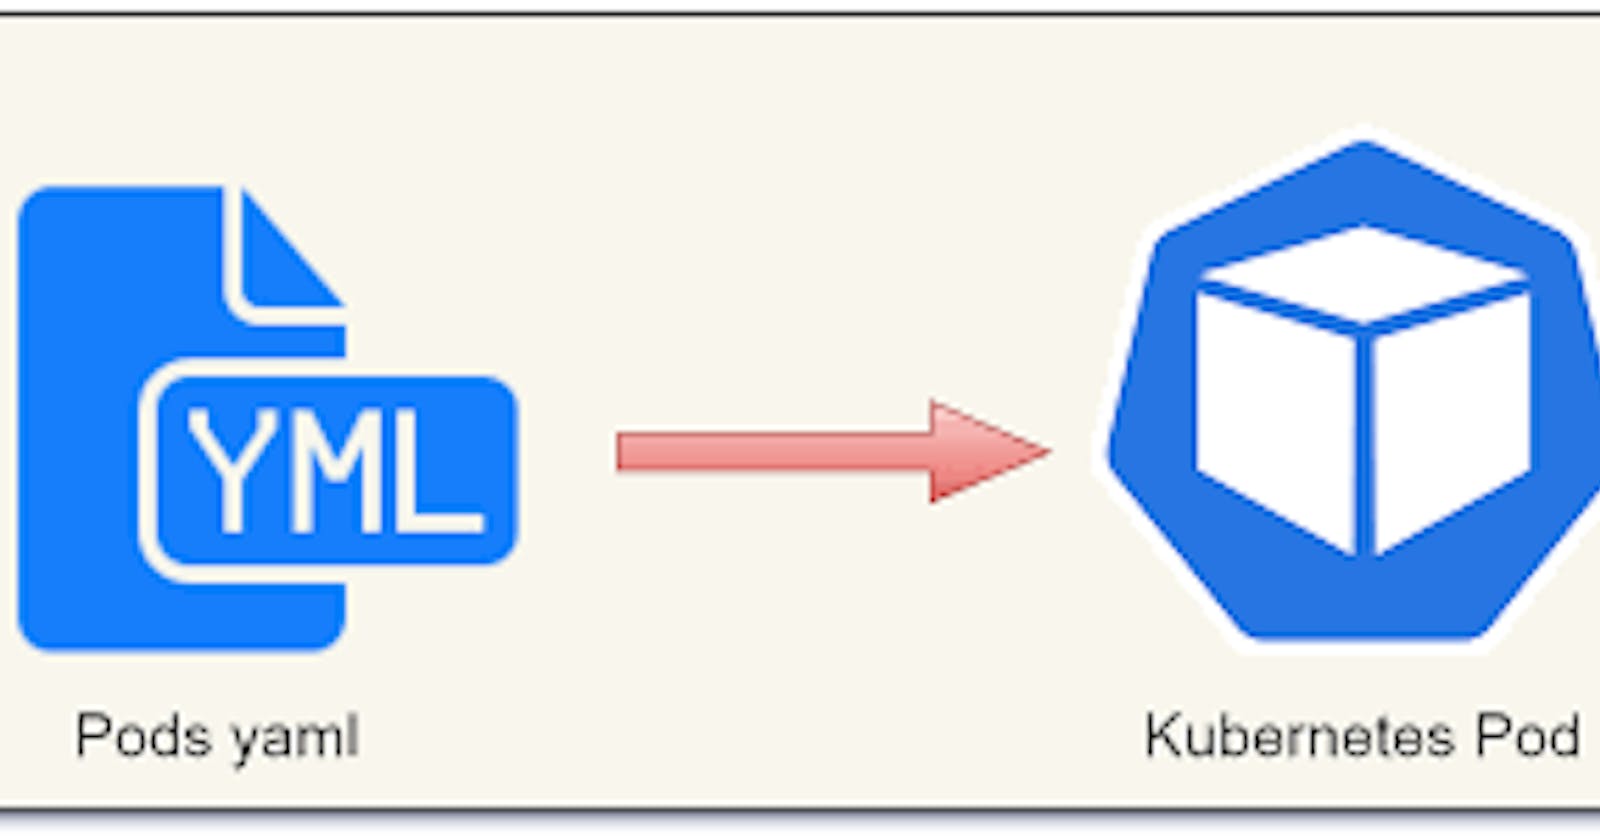 How to Deploy POD in Kubernetes via file method /Yaml:-